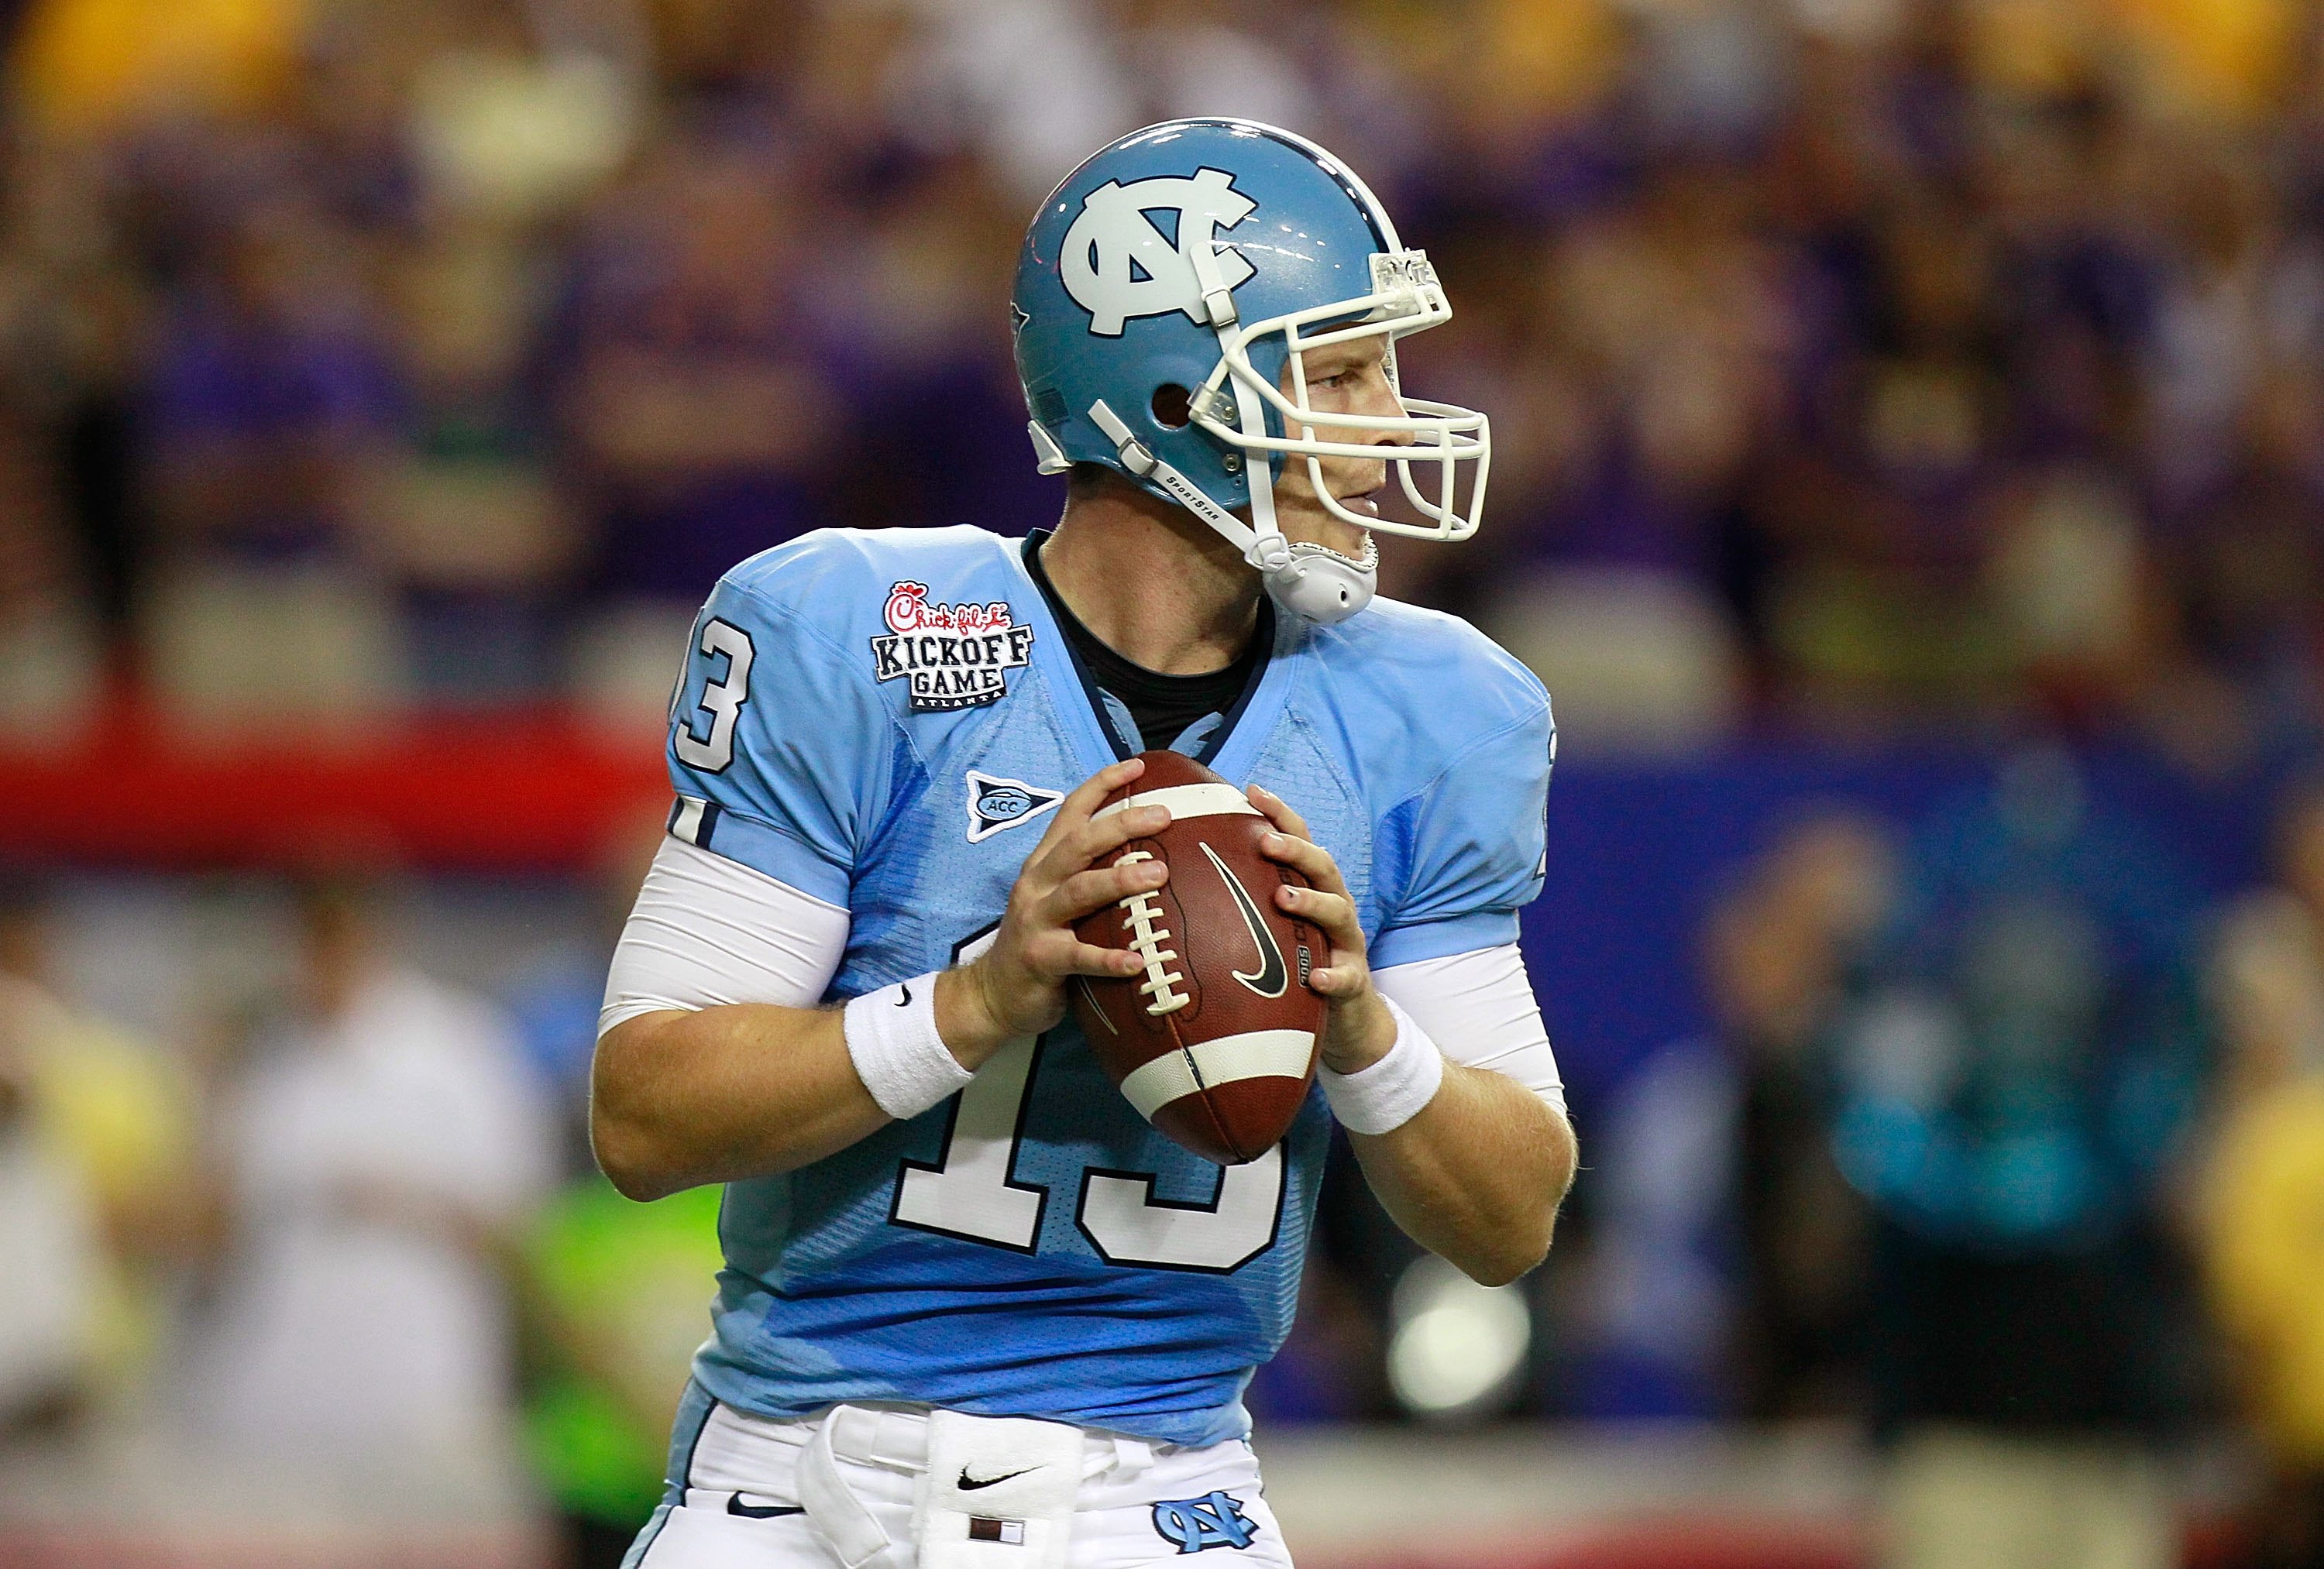 Quarterback T.J. Yates of North Carolina in the Chick-fil-A Kickoff Game in 2010 (Photo by Kevin C. Cox/Getty Images)